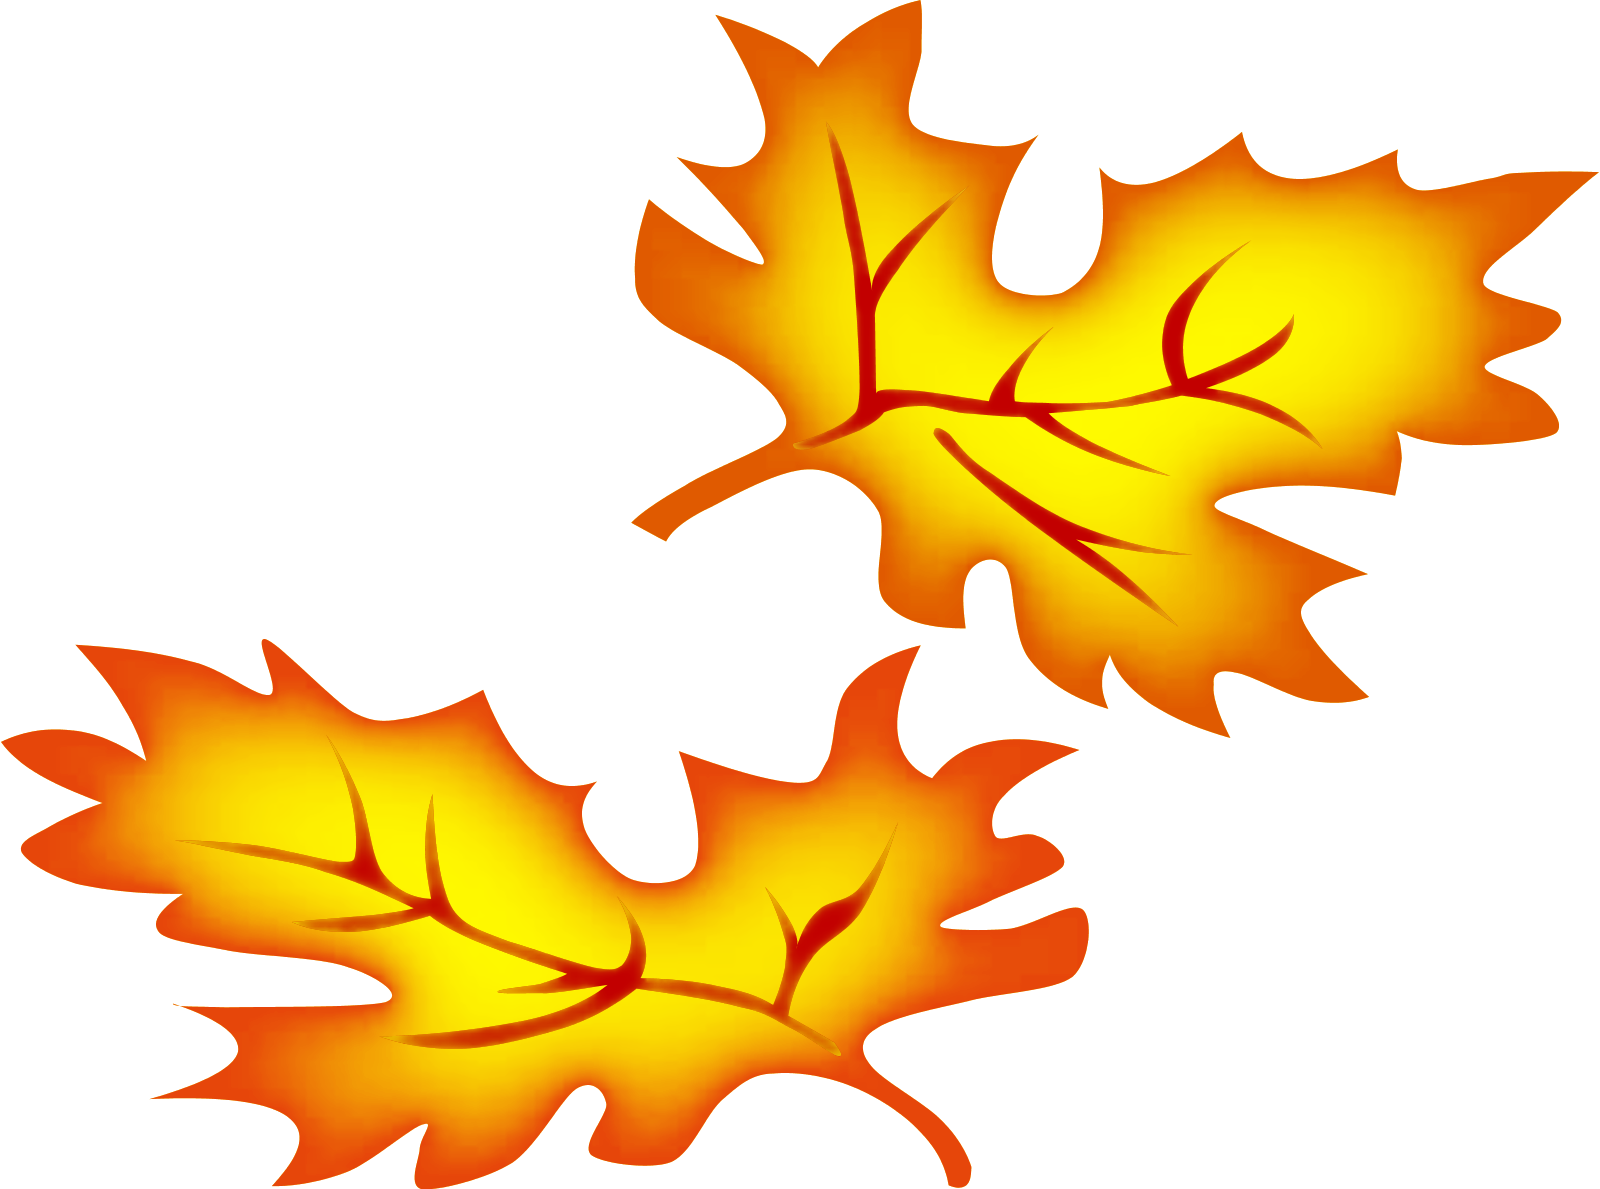 Falling Leaves Clip Art | Clipart Panda - Free Clipart Images